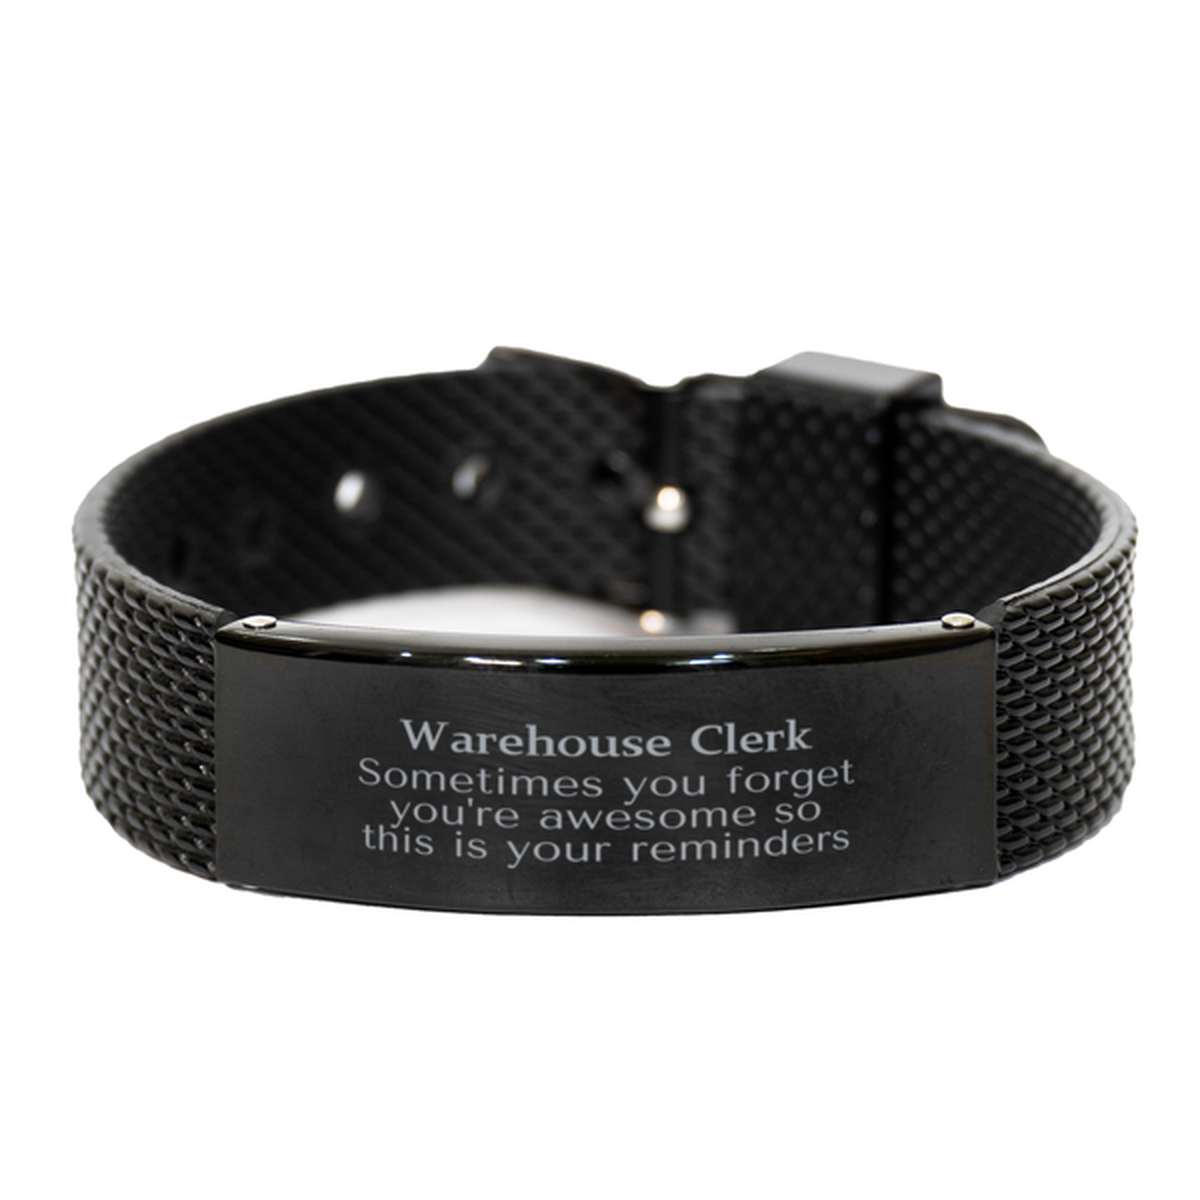 Sentimental Warehouse Clerk Black Shark Mesh Bracelet, Warehouse Clerk Sometimes you forget you're awesome so this is your reminders, Graduation Christmas Birthday Gifts for Warehouse Clerk, Men, Women, Coworkers